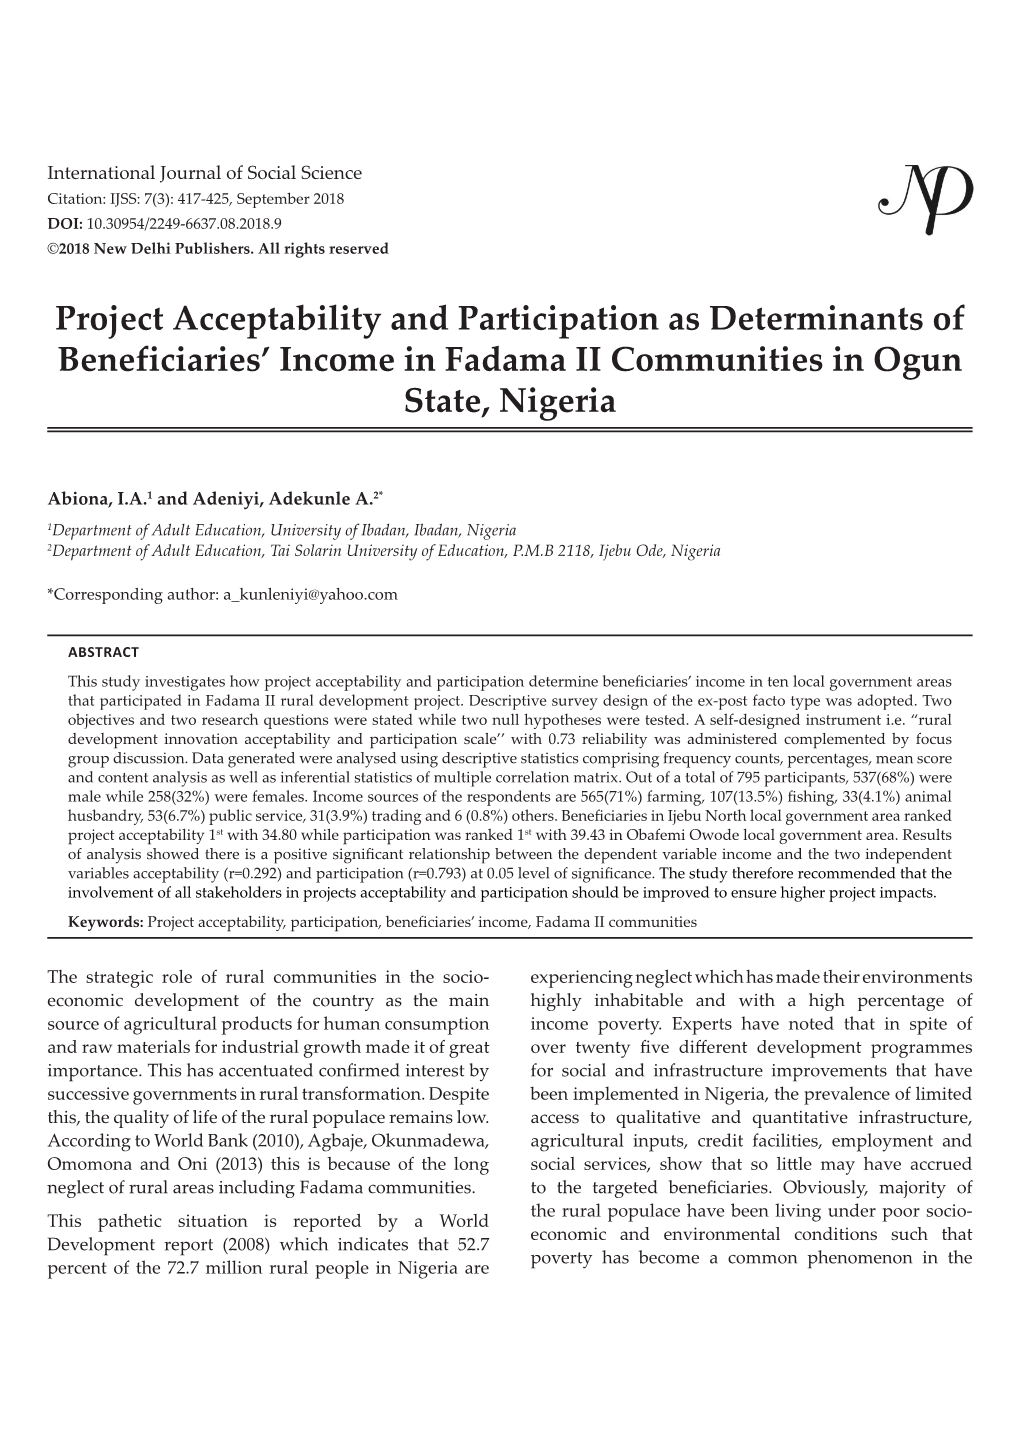 Project Acceptability and Participation As Determinants of Beneficiaries’ Income in Fadama II Communities in Ogun State, Nigeria